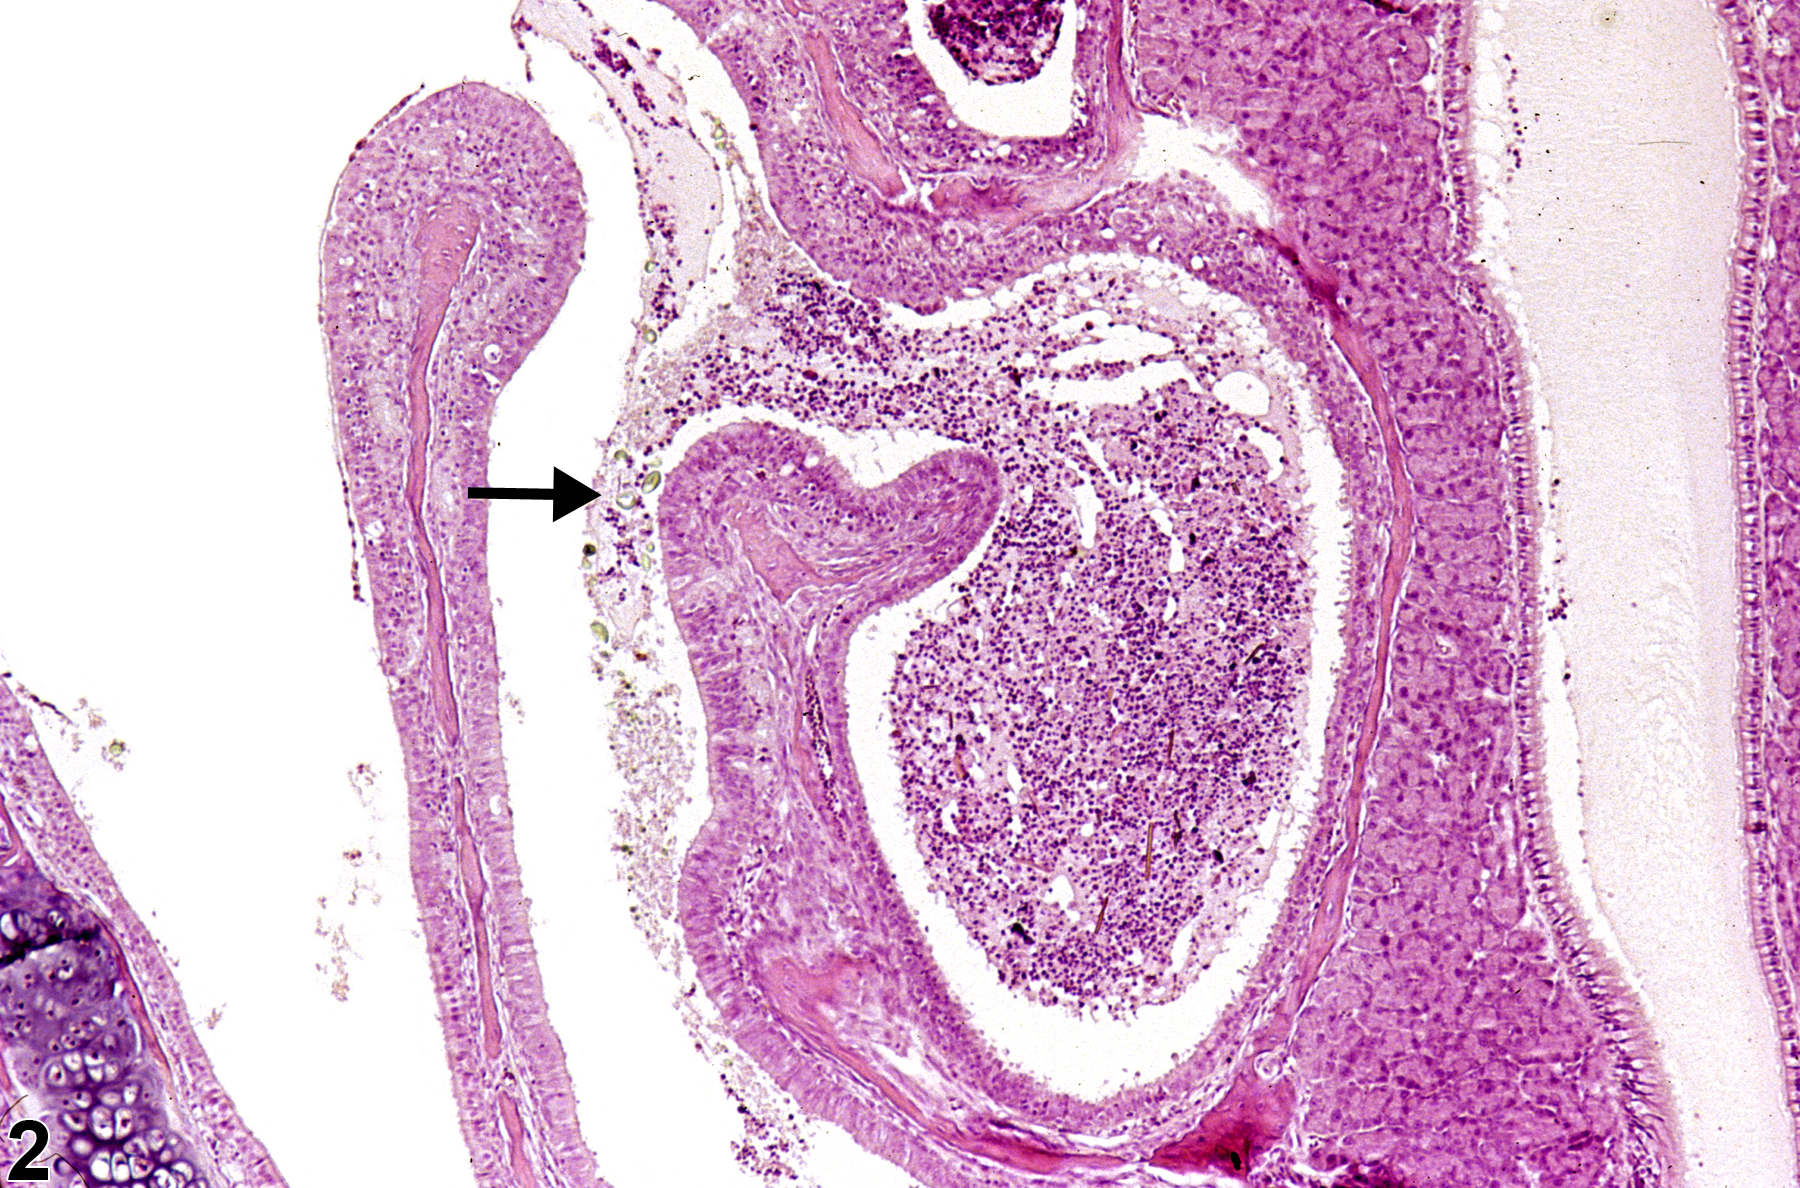 Image of foreign body in the nose from a female B6C3F1/N mouse in a subchronic study